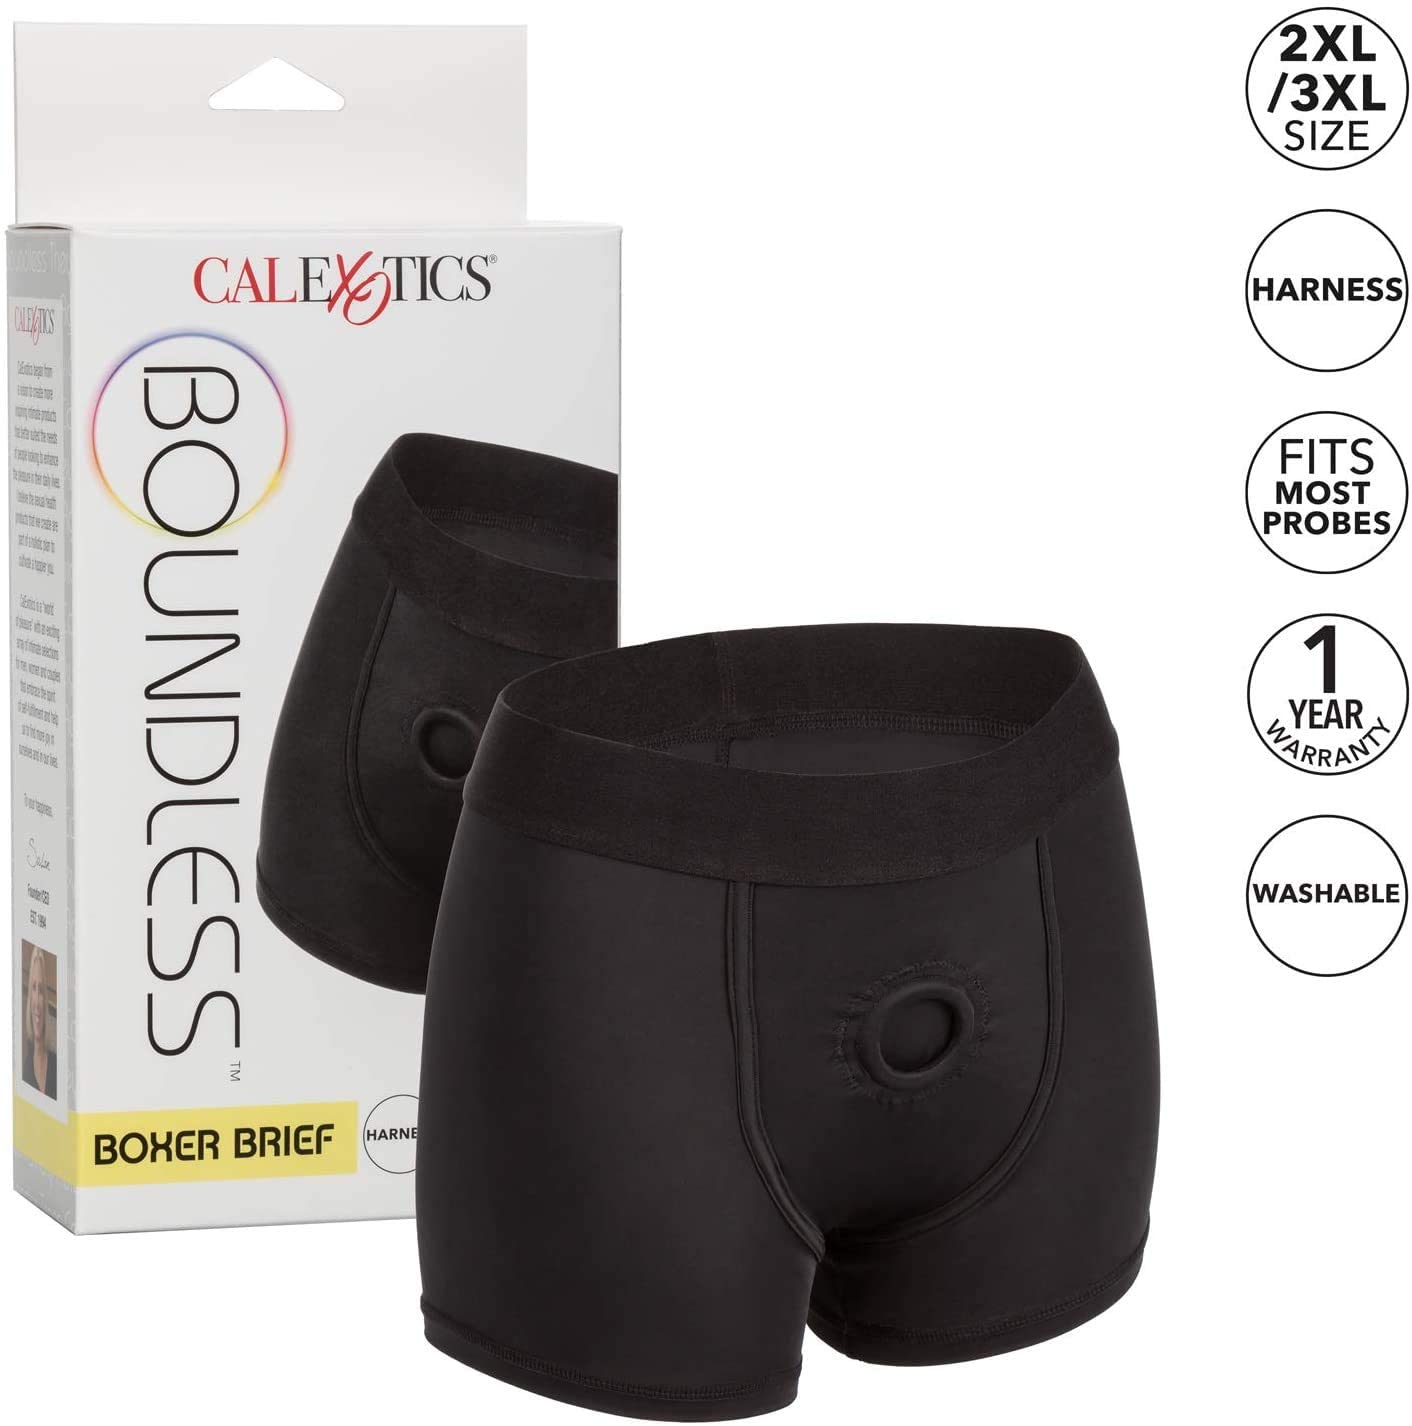 BOUNDLESS BOXER BRIEF HARNESS